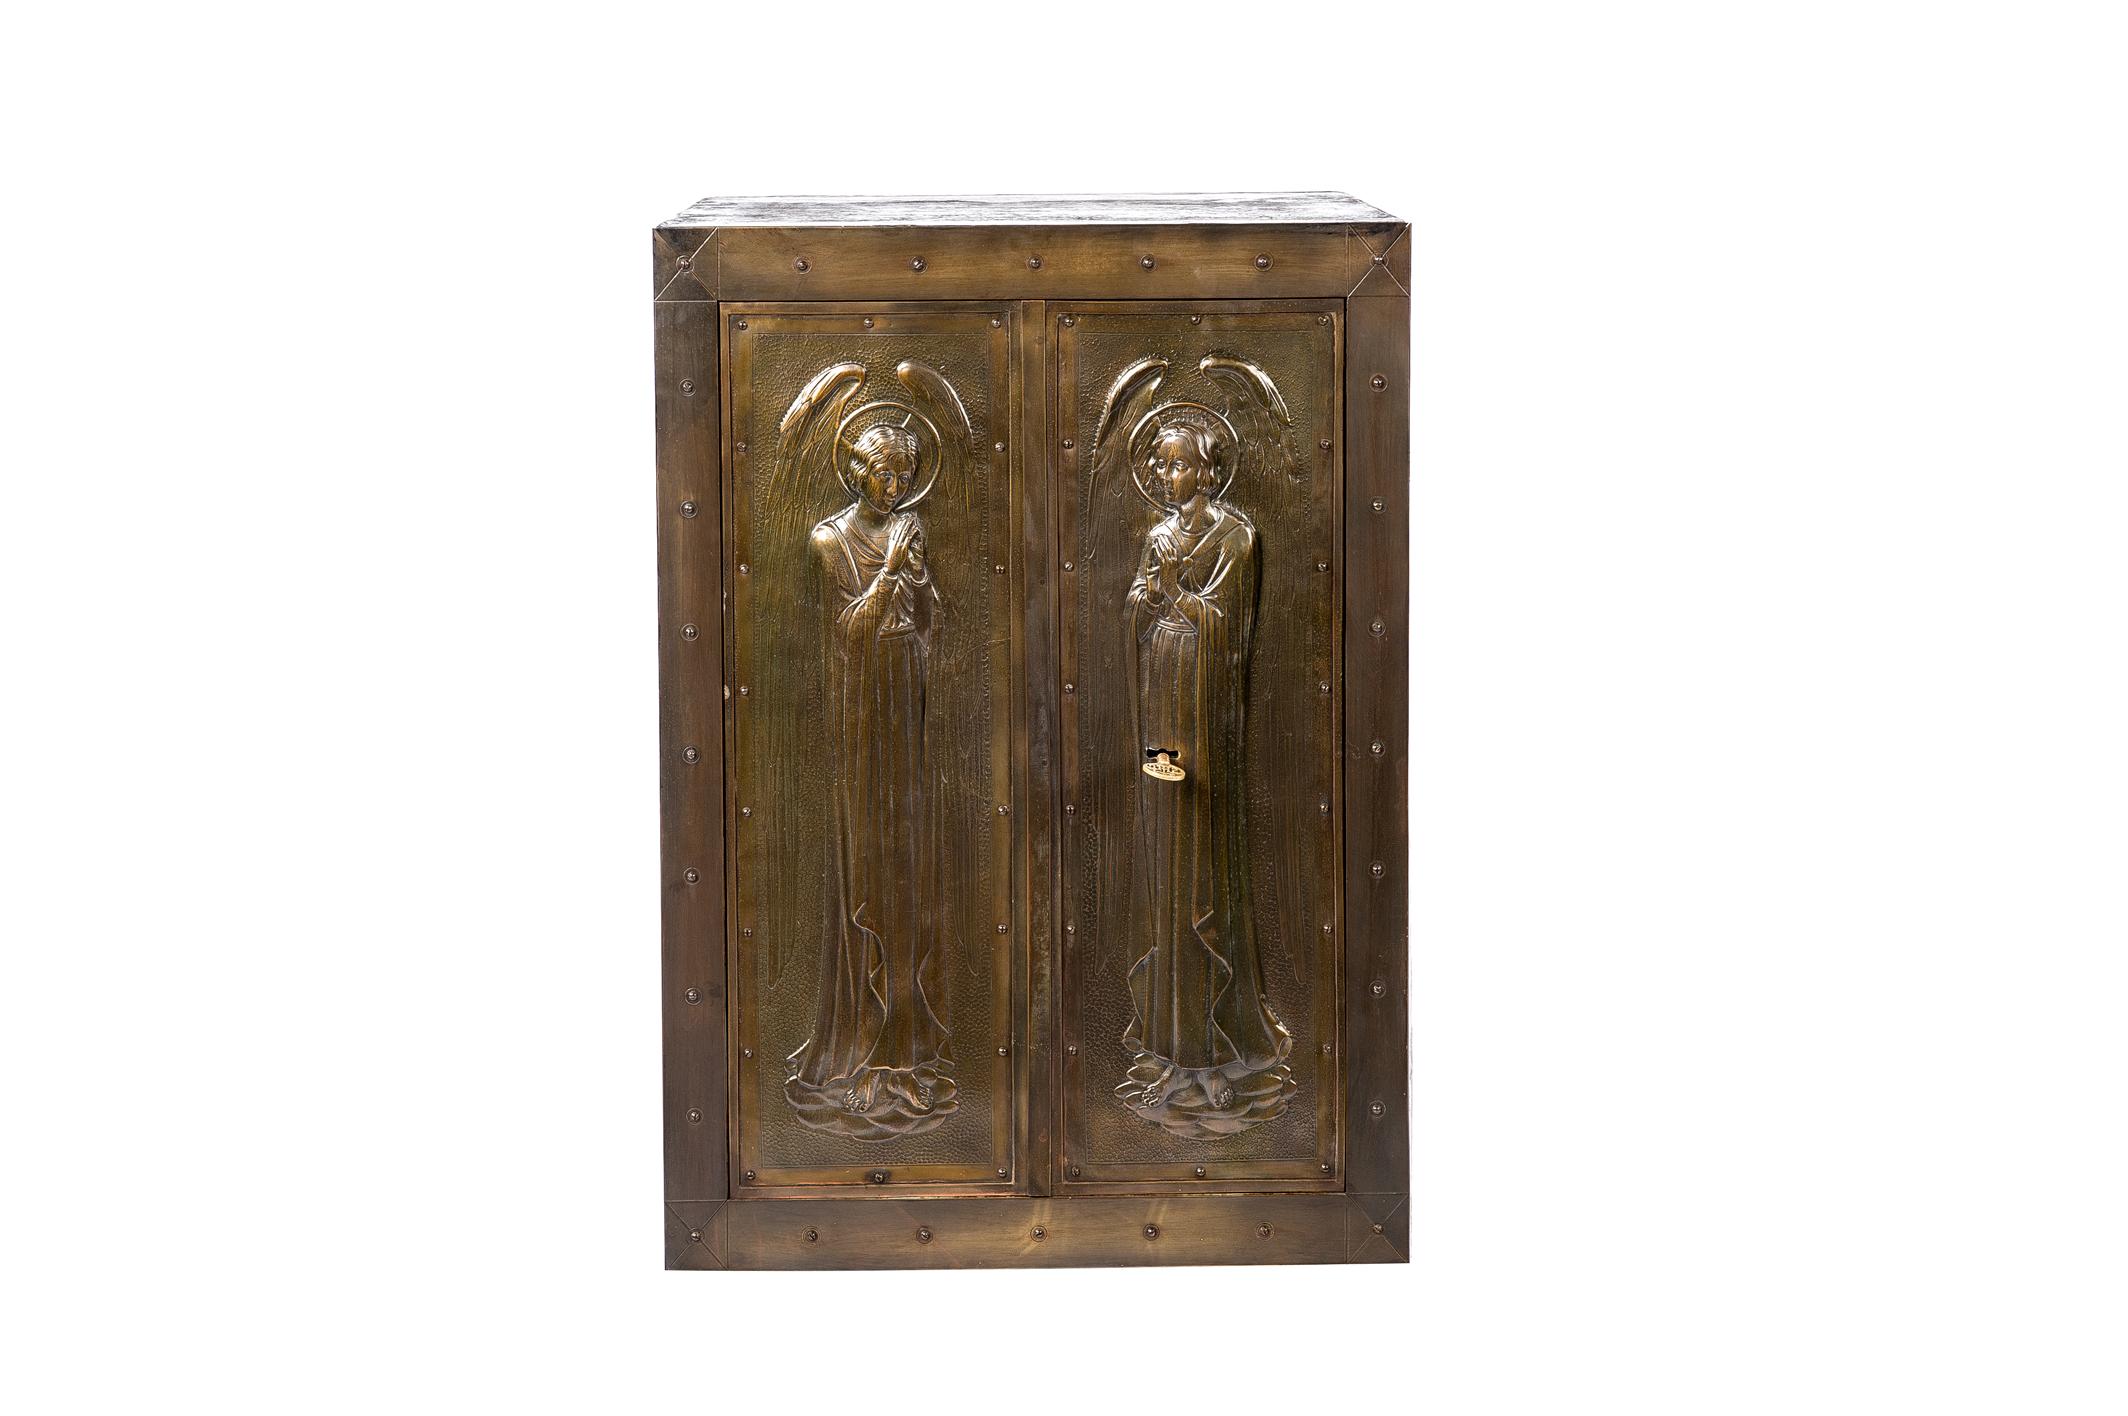 A beautiful unique antique forged steel safe or tabernacle with double doors. The doors are decorated with two angels with wings and a nimbus. The door panels were made from sheets of brass and the decorations were hammered in elegant Art Nouveau